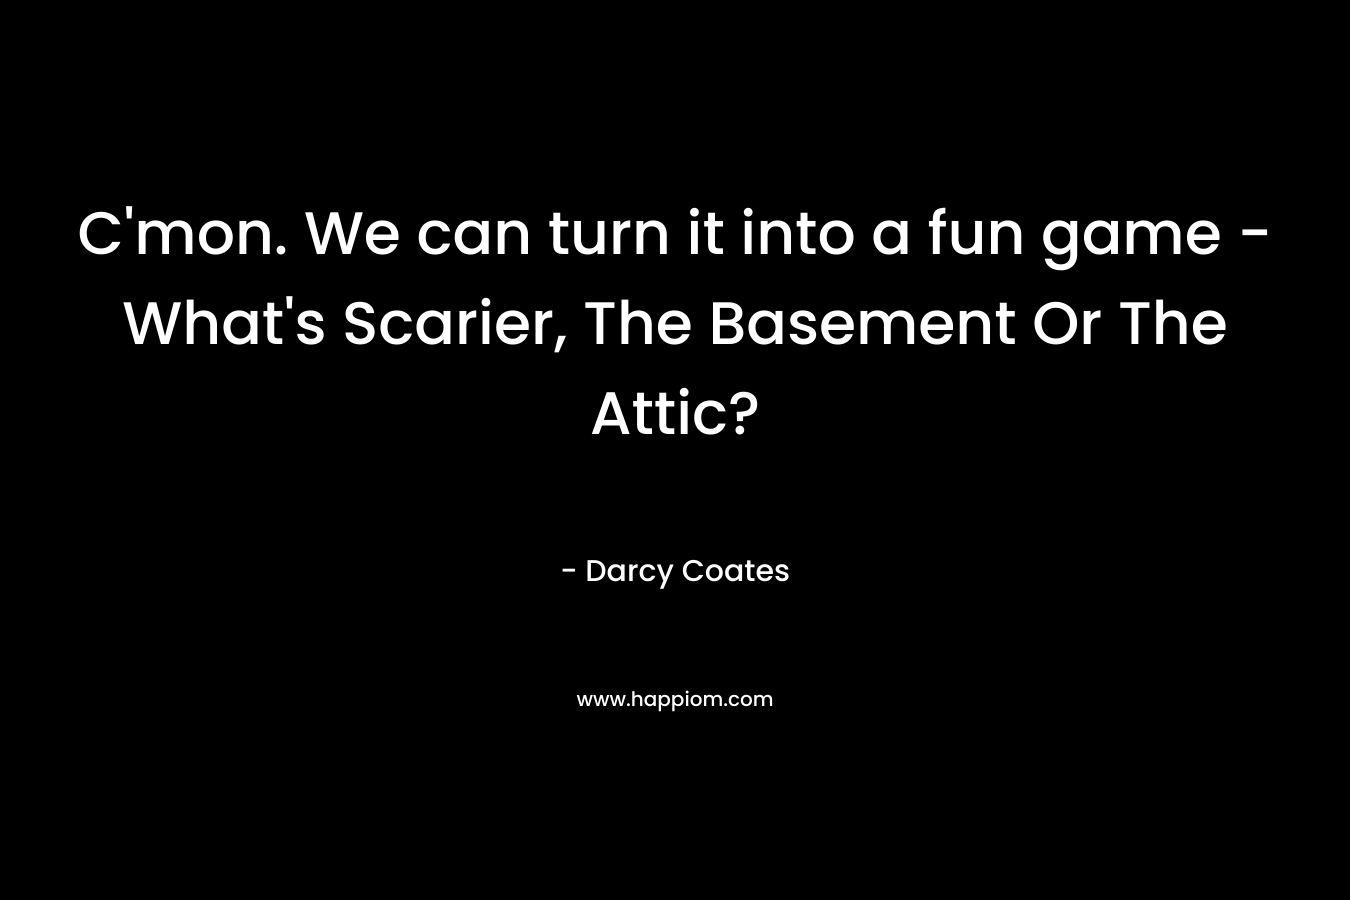 C'mon. We can turn it into a fun game - What's Scarier, The Basement Or The Attic?